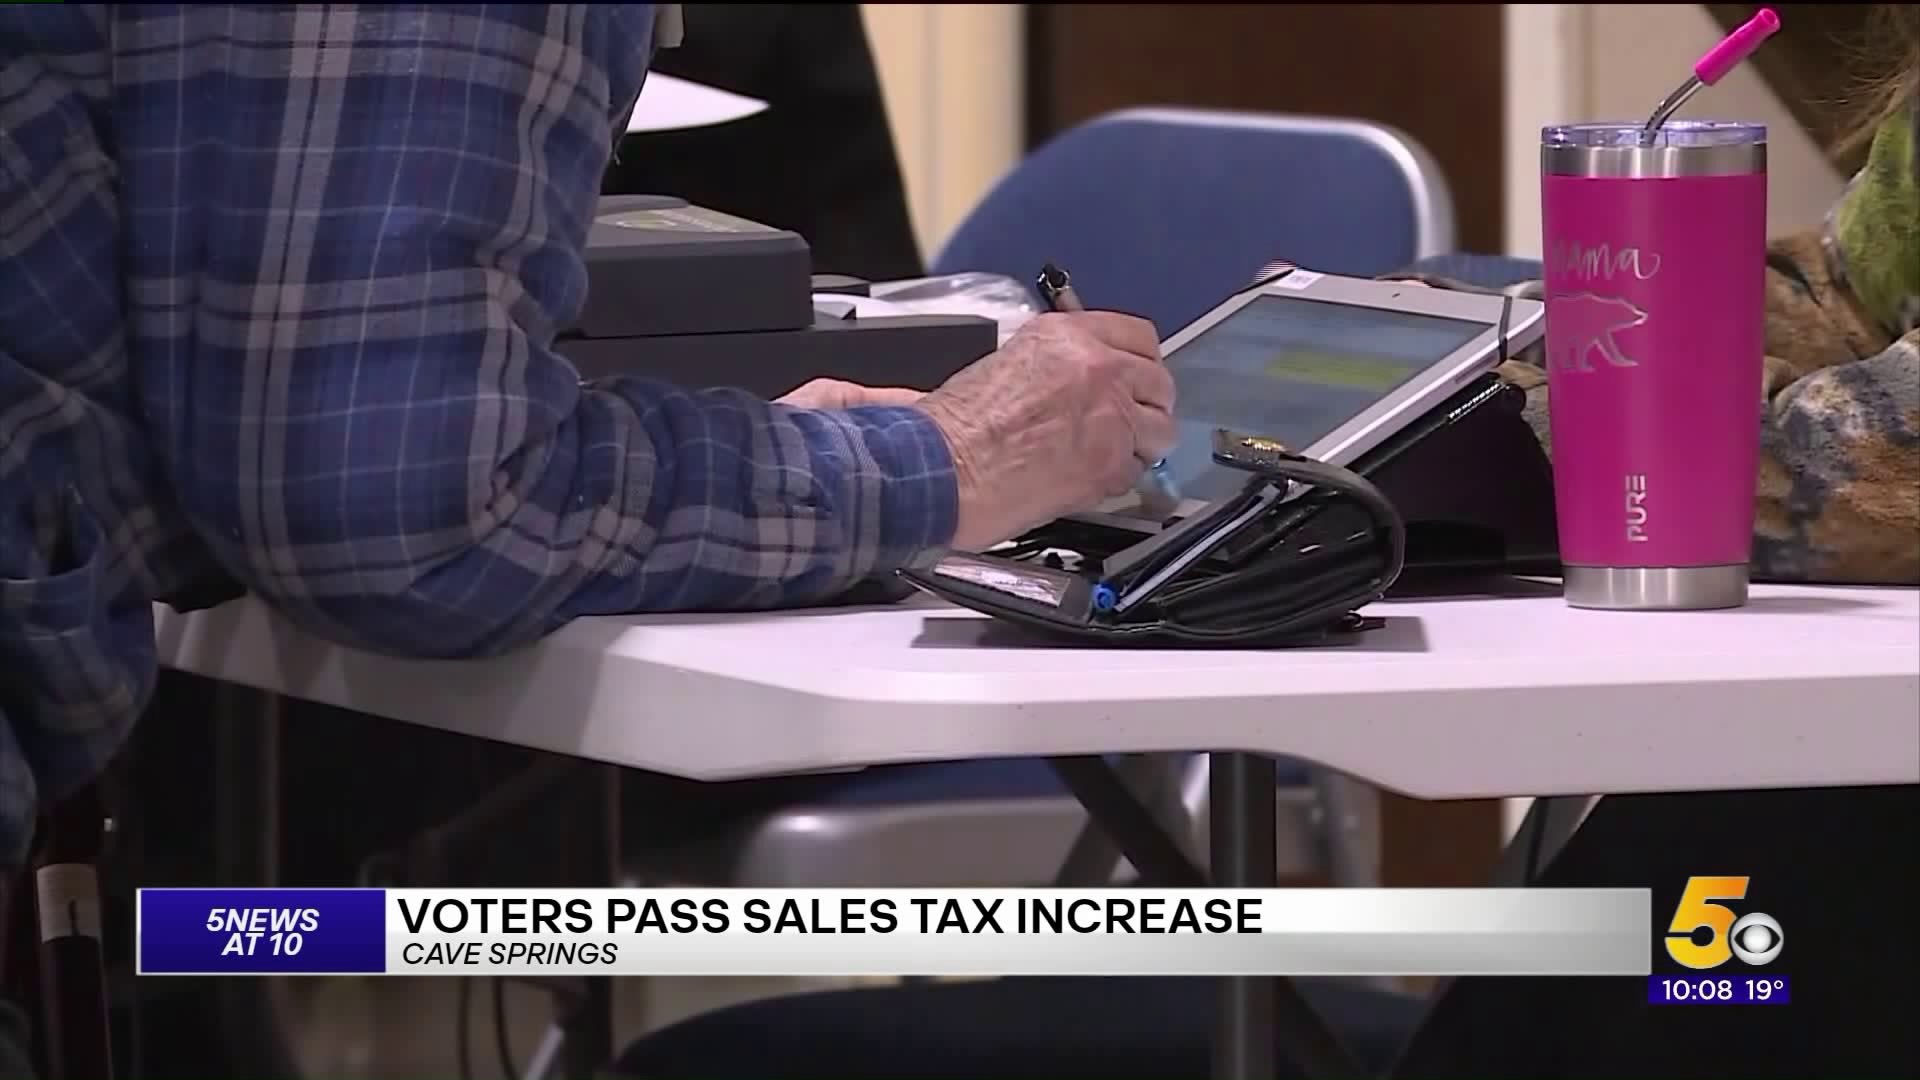 Cave Springs Voters Pass Sales Tax Increase